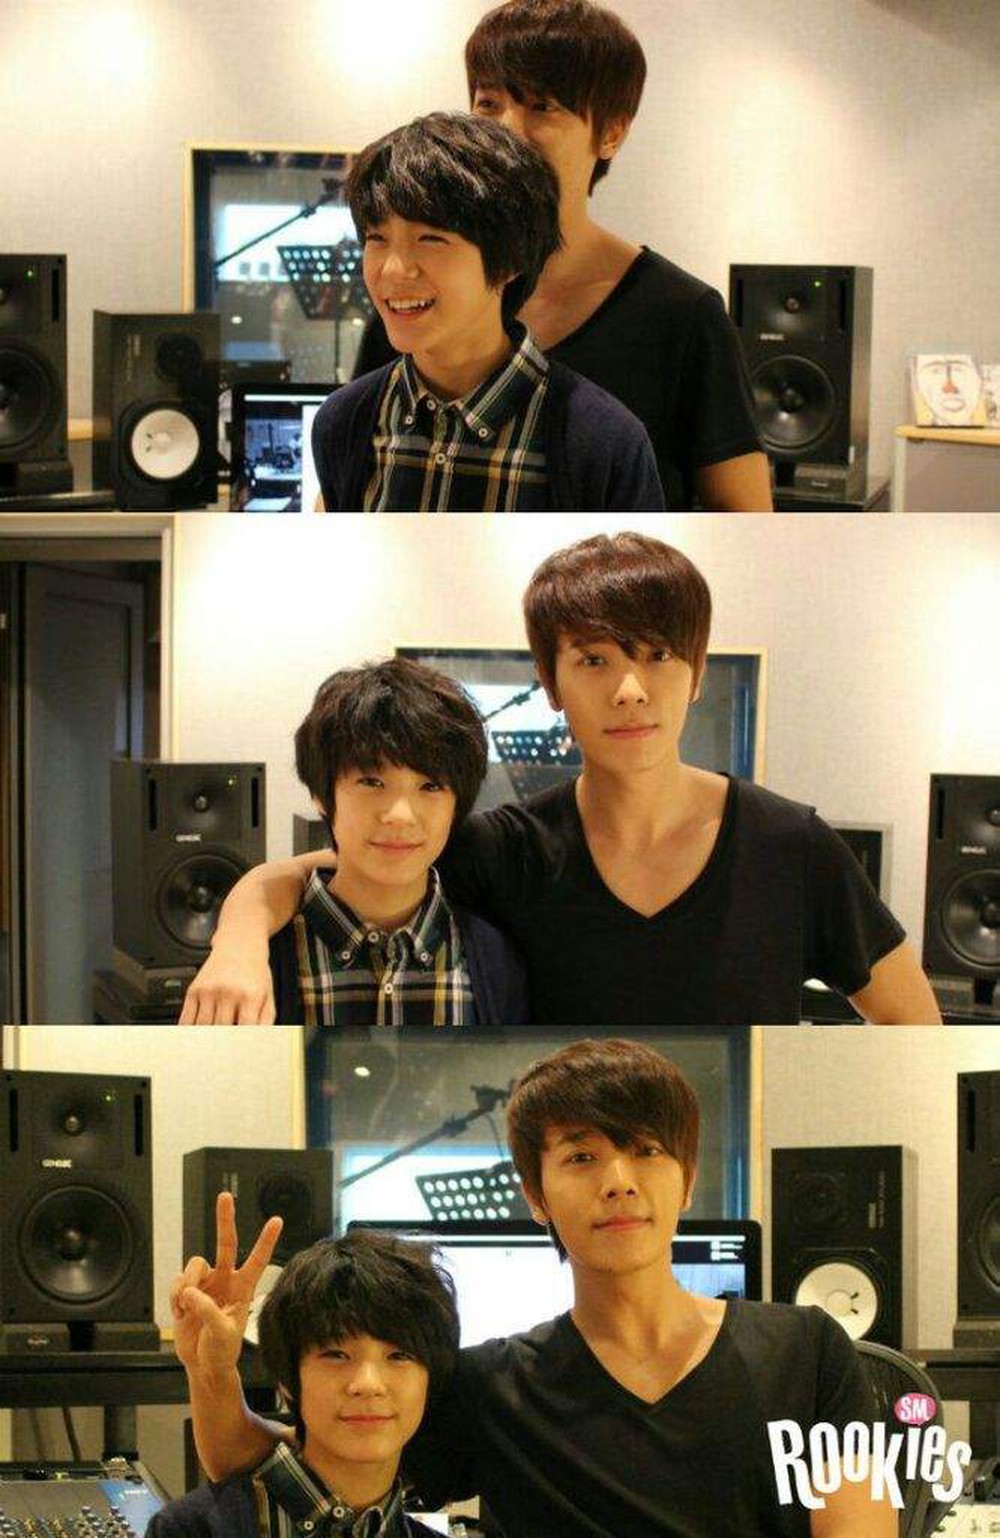 jeno and donghae